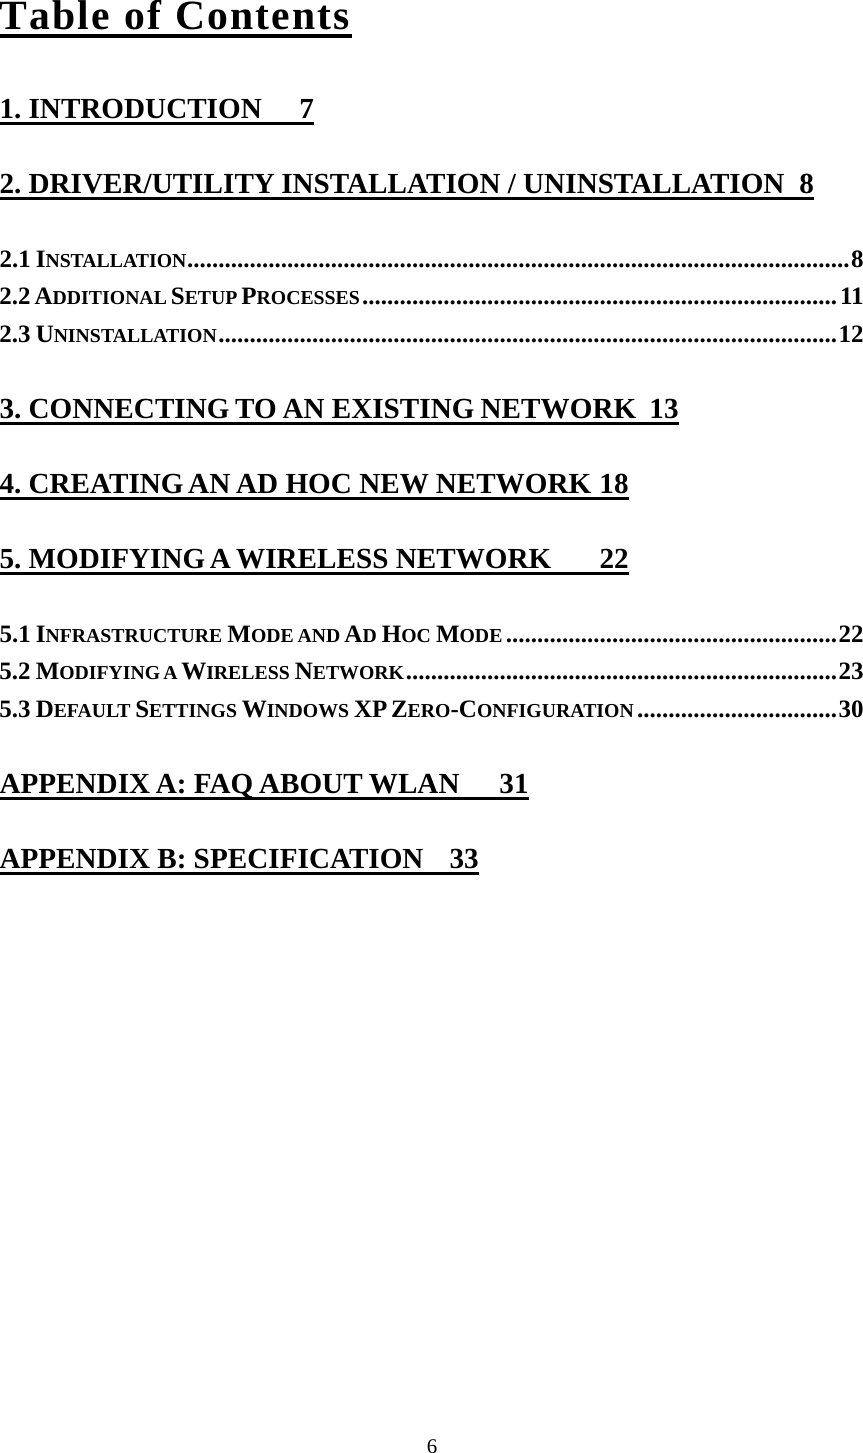  6Table of Contents 1. INTRODUCTION  7 2. DRIVER/UTILITY INSTALLATION / UNINSTALLATION  8 2.1 INSTALLATION..........................................................................................................8 2.2 ADDITIONAL SETUP PROCESSES............................................................................11 2.3 UNINSTALLATION...................................................................................................12 3. CONNECTING TO AN EXISTING NETWORK  13 4. CREATING AN AD HOC NEW NETWORK 18 5. MODIFYING A WIRELESS NETWORK  22 5.1 INFRASTRUCTURE MODE AND AD HOC MODE .....................................................22 5.2 MODIFYING A WIRELESS NETWORK.....................................................................23 5.3 DEFAULT SETTINGS WINDOWS XP ZERO-CONFIGURATION ................................30 APPENDIX A: FAQ ABOUT WLAN  31 APPENDIX B: SPECIFICATION  33 